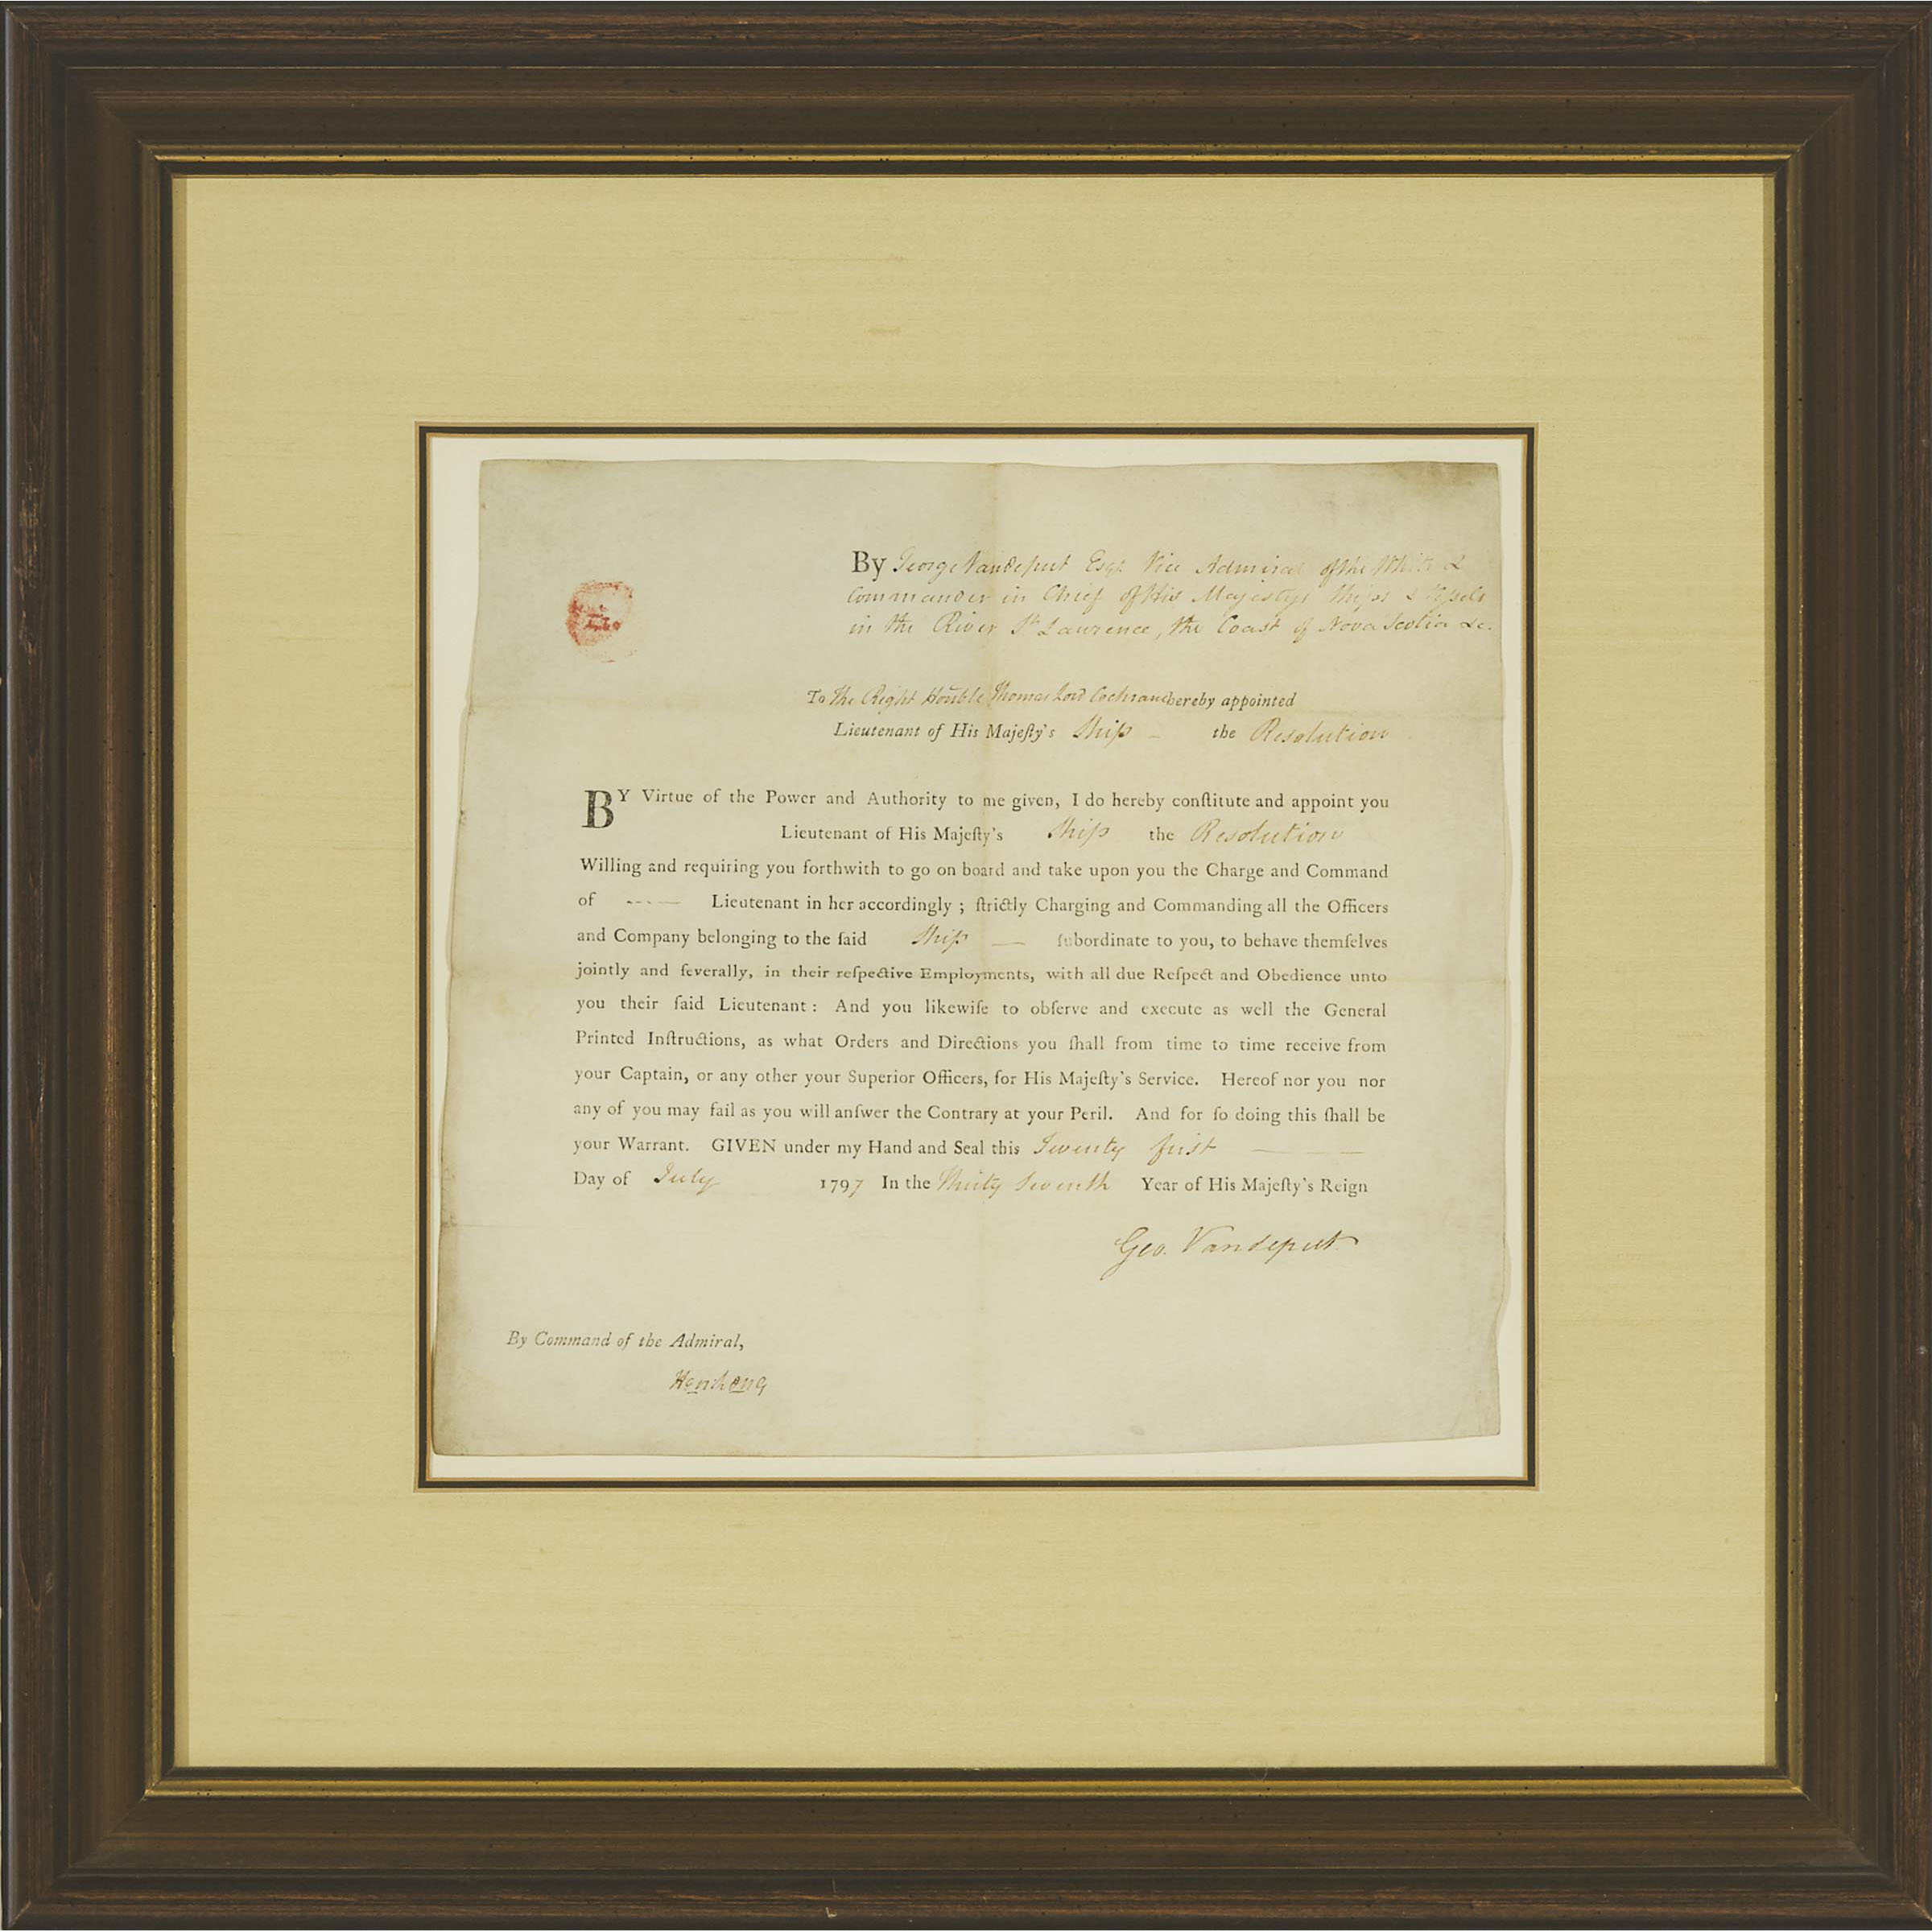 Royal Navy Appointment Signed by Vice Admiral George Vandeput, 'Chief of His Majesty's Ships and Vessels in the River St. Laurence, the Coast of Nova Scotia, &c.', July 21st, 1797